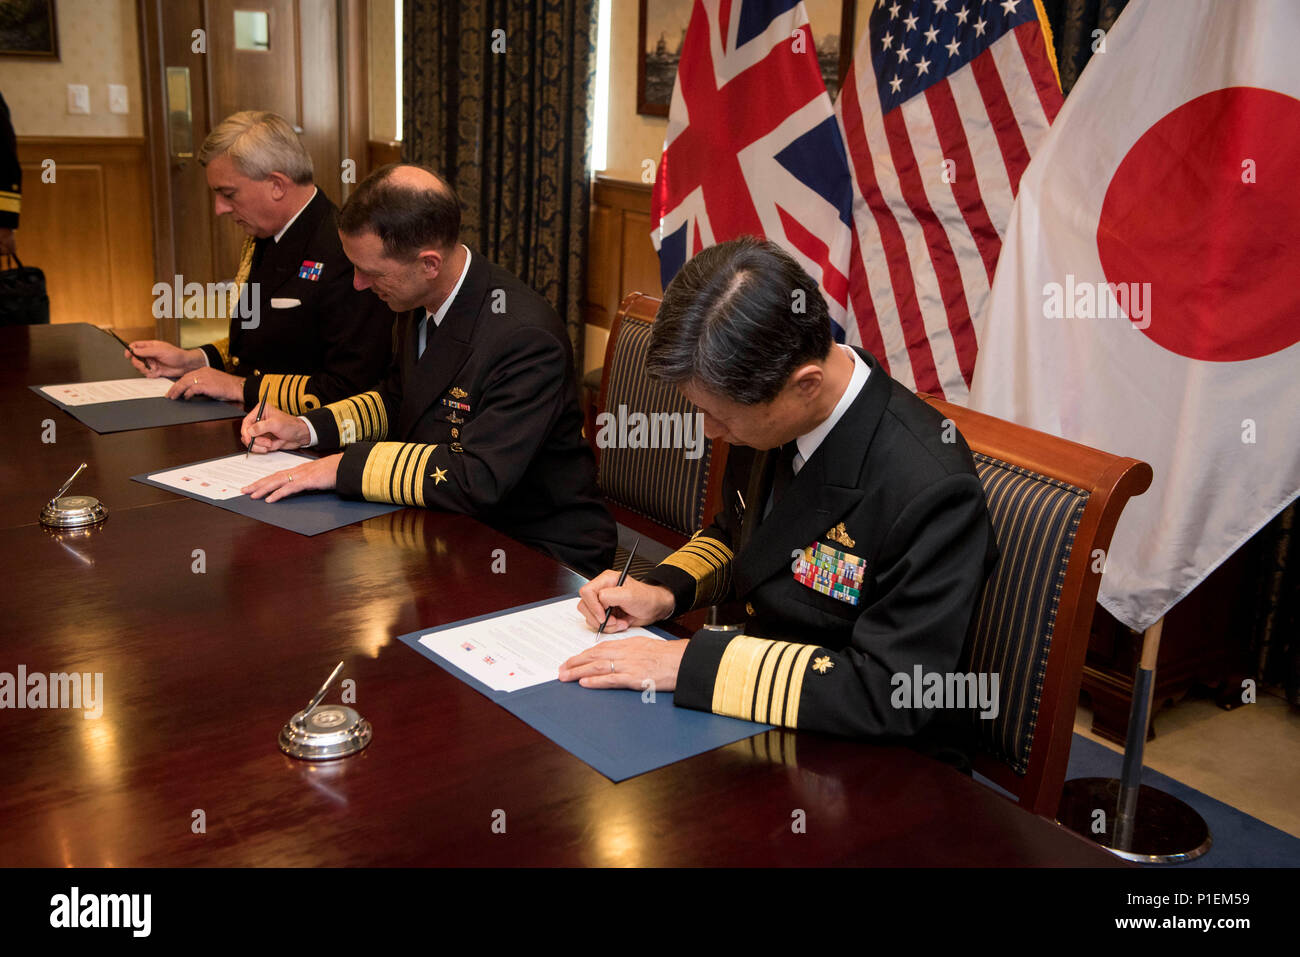 161020-N-ES994-051  WASHINGTON (Oct. 20, 2016) Chief of Naval Operations (CNO) Adm. John Richardson; First Sea Lord, United Kingdom Royal Navy, Adm. Sir Phillip Jones; and Chief of Staff of the Japan Maritime Self-Defence Force, Adm. Tomohisa Takei, signed an agreement affirming their commitment to increased collaboration and cooperation, following a trilateral maritime discussion, Oct. 20, in the Pentagon. This is the first time the three chiefs have held such an event. Given the increase in maritime traffic worldwide and current events, the symbolism of this engagement can’t be overstated. ( Stock Photo